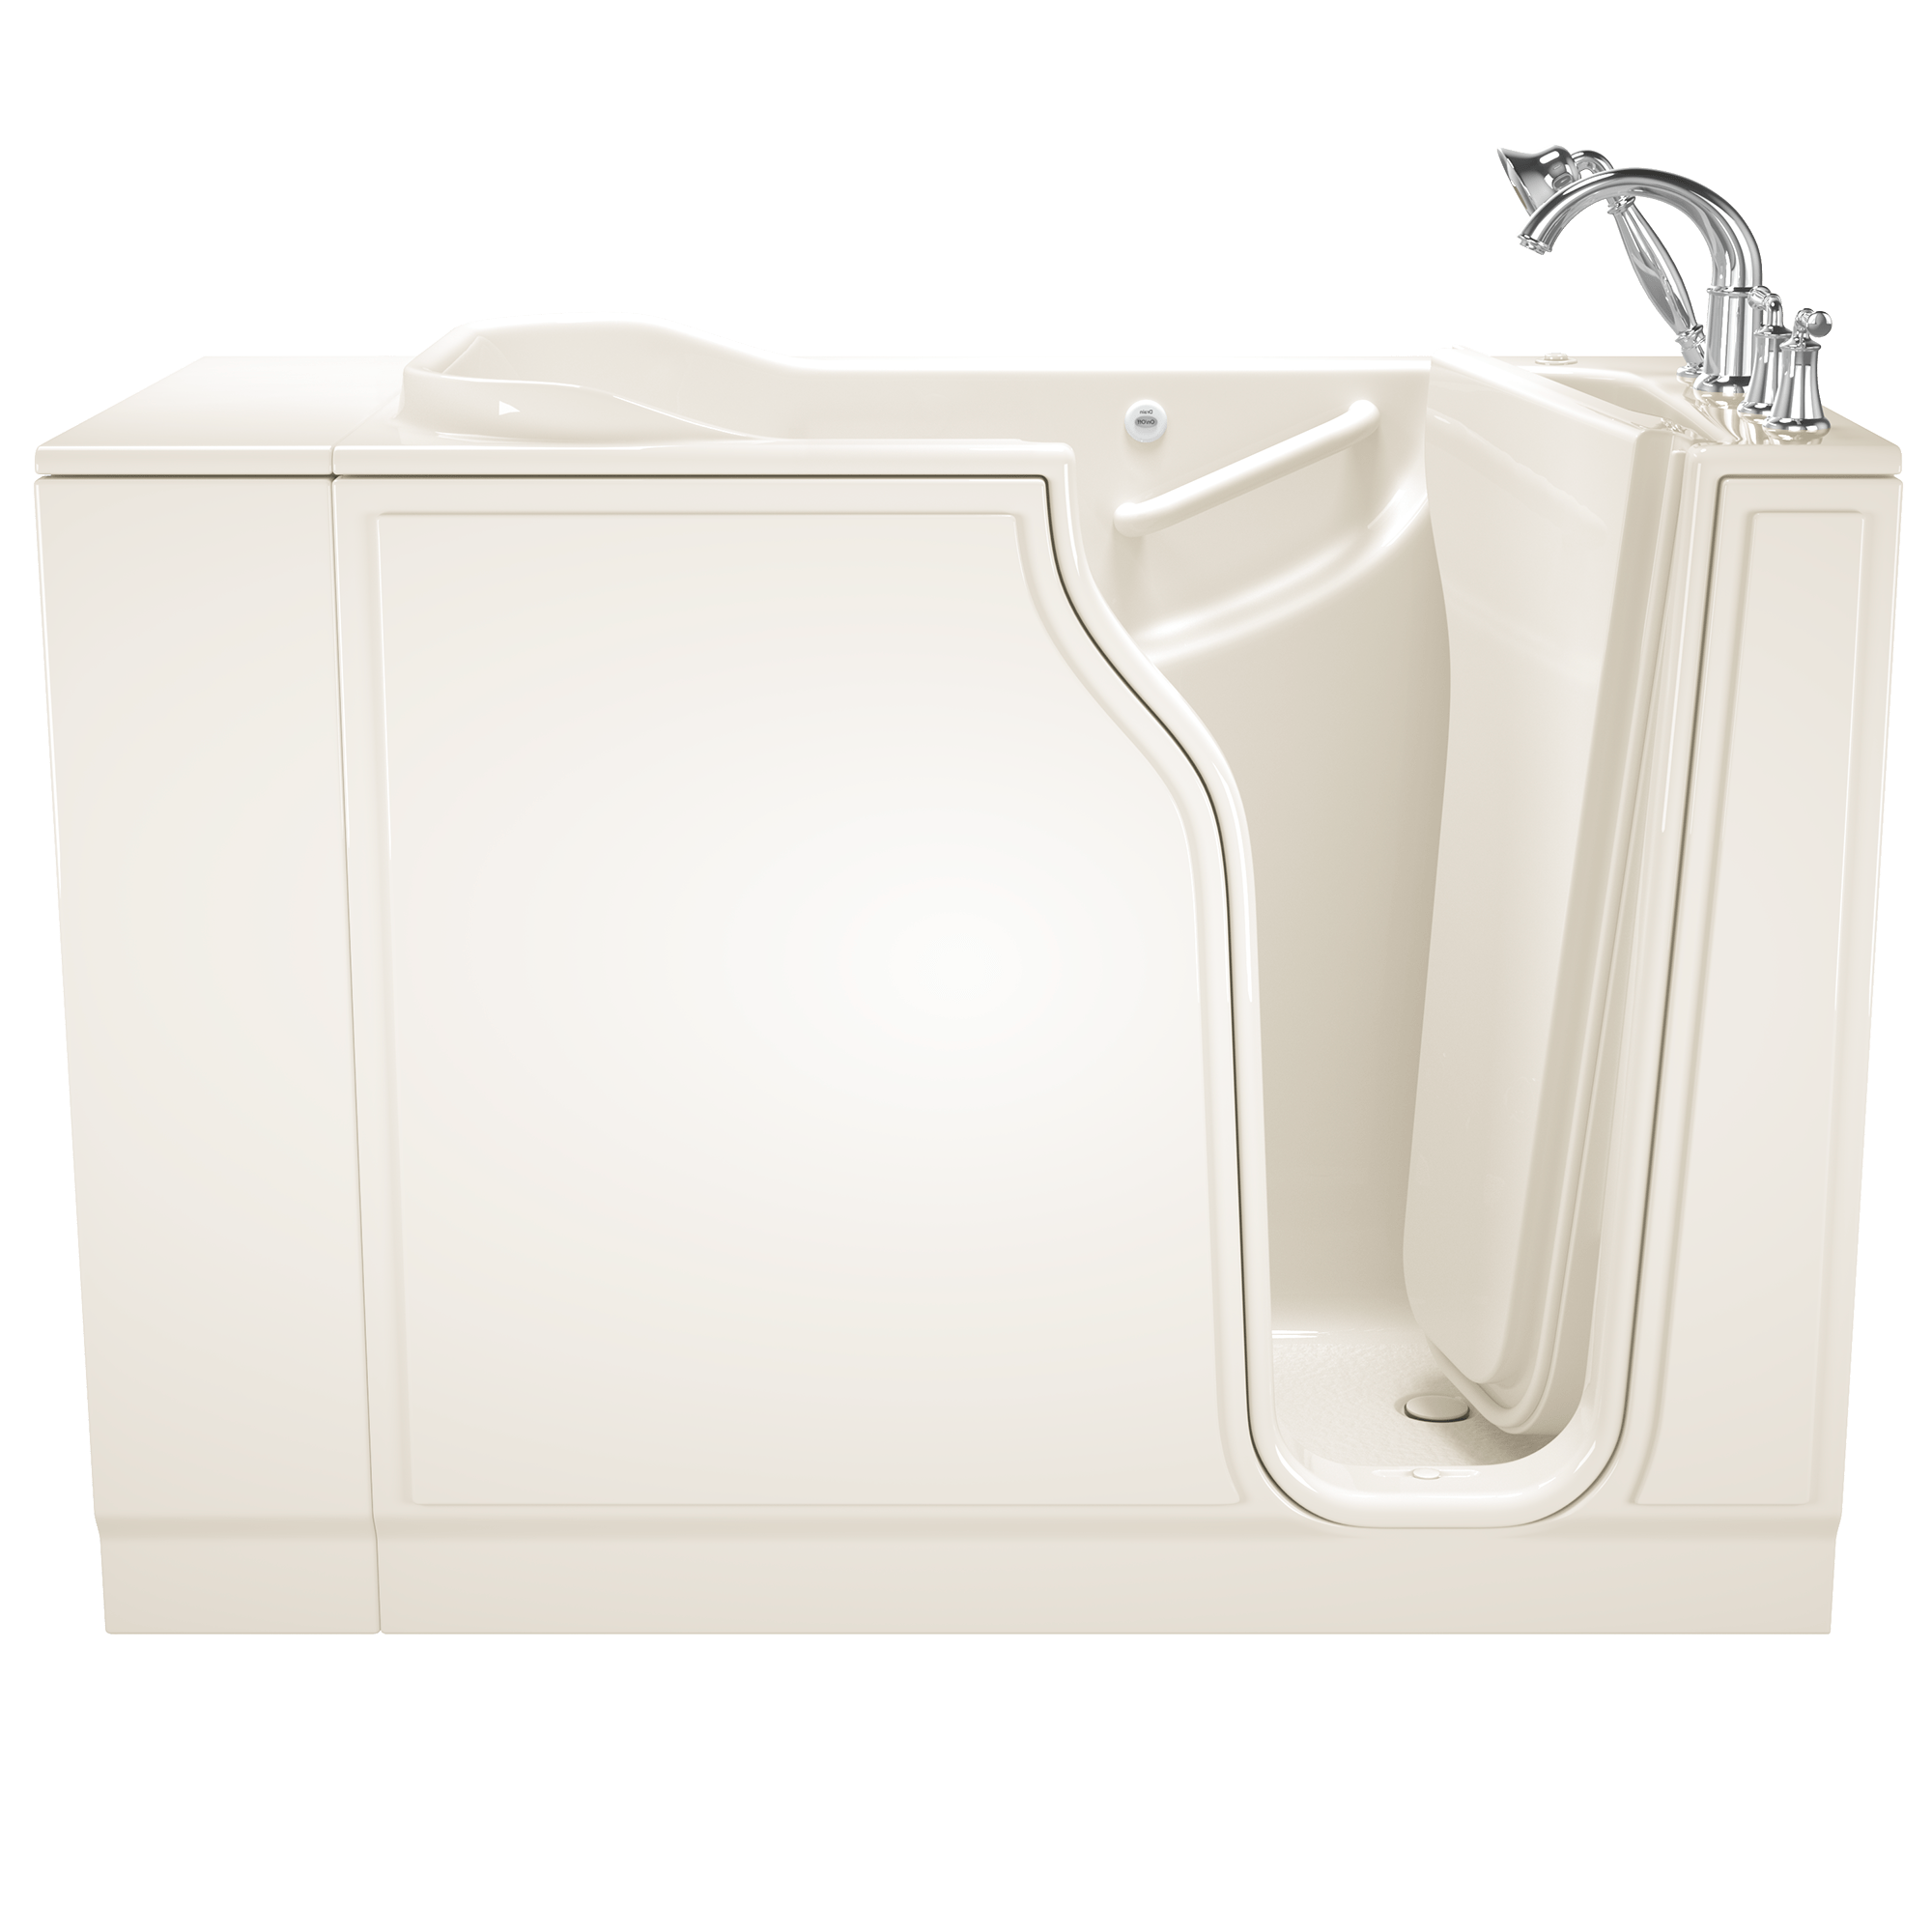 Gelcoat Value Series 30 x 52  Inch Walk in Tub With Air Spa System   Right Hand Drain With Faucet WIB LINEN